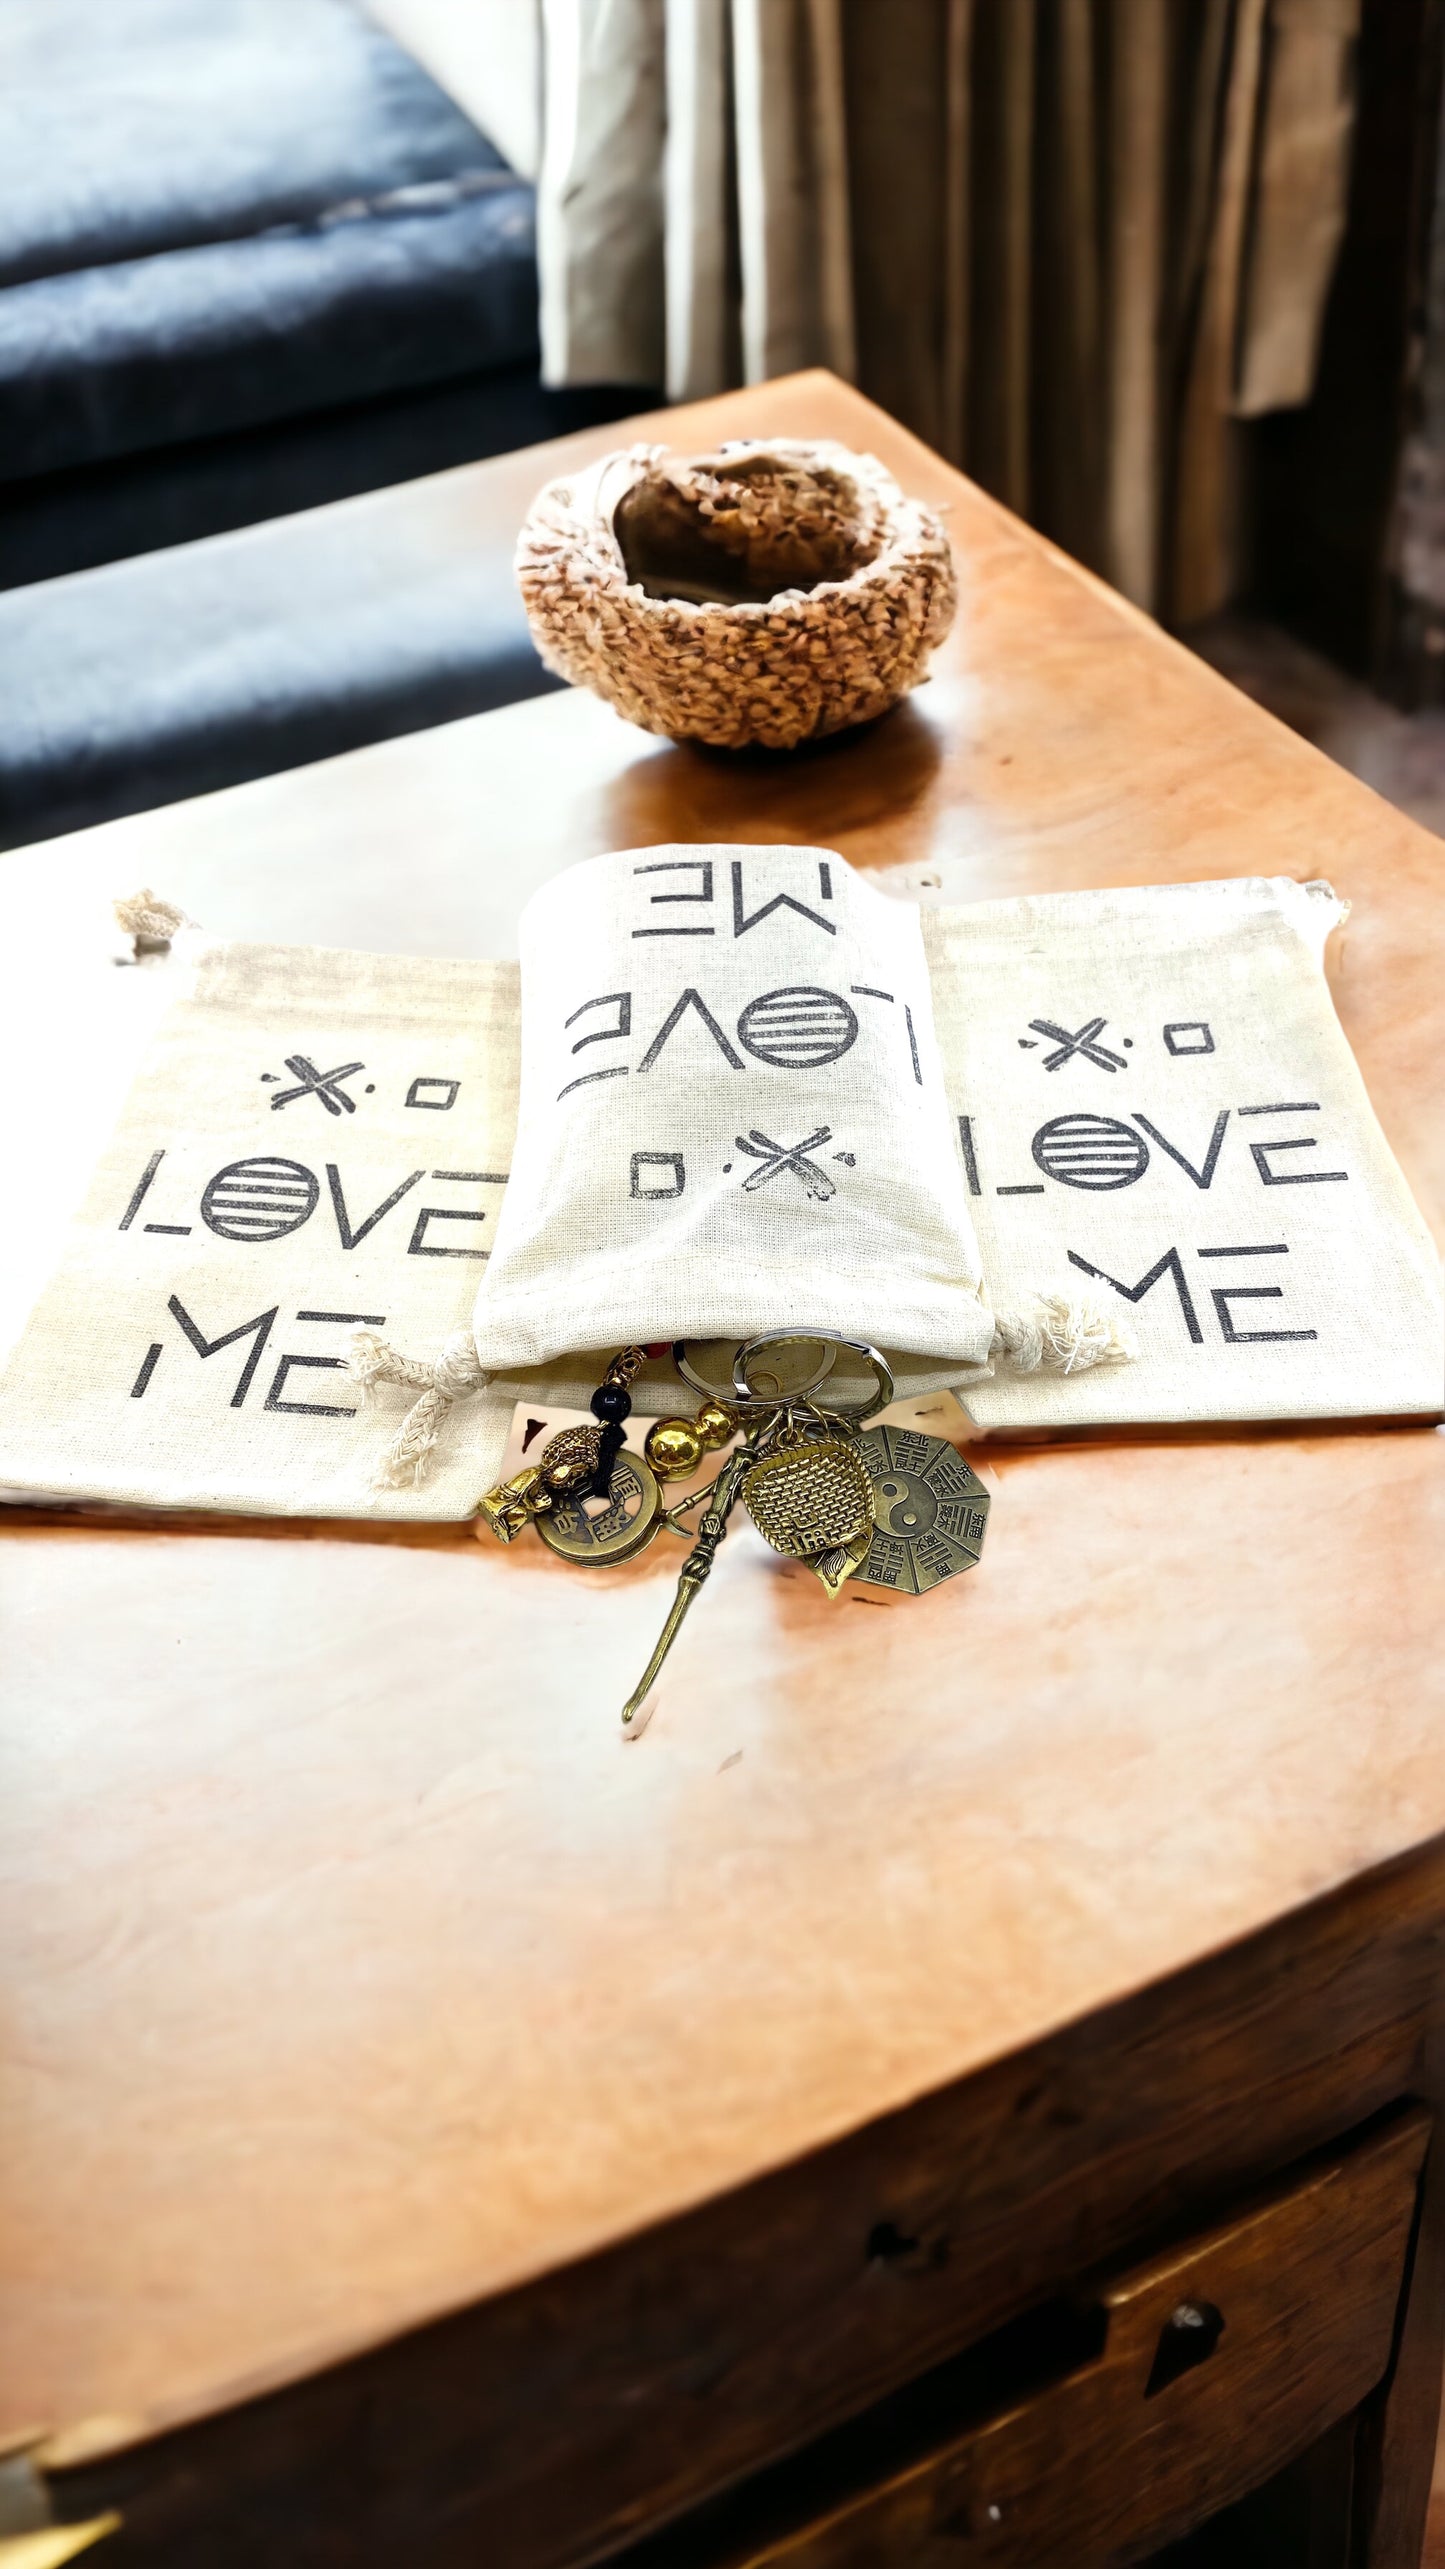 Hand Stamped, Love Me, Cotton Drawstring Pouches 4" x 6"